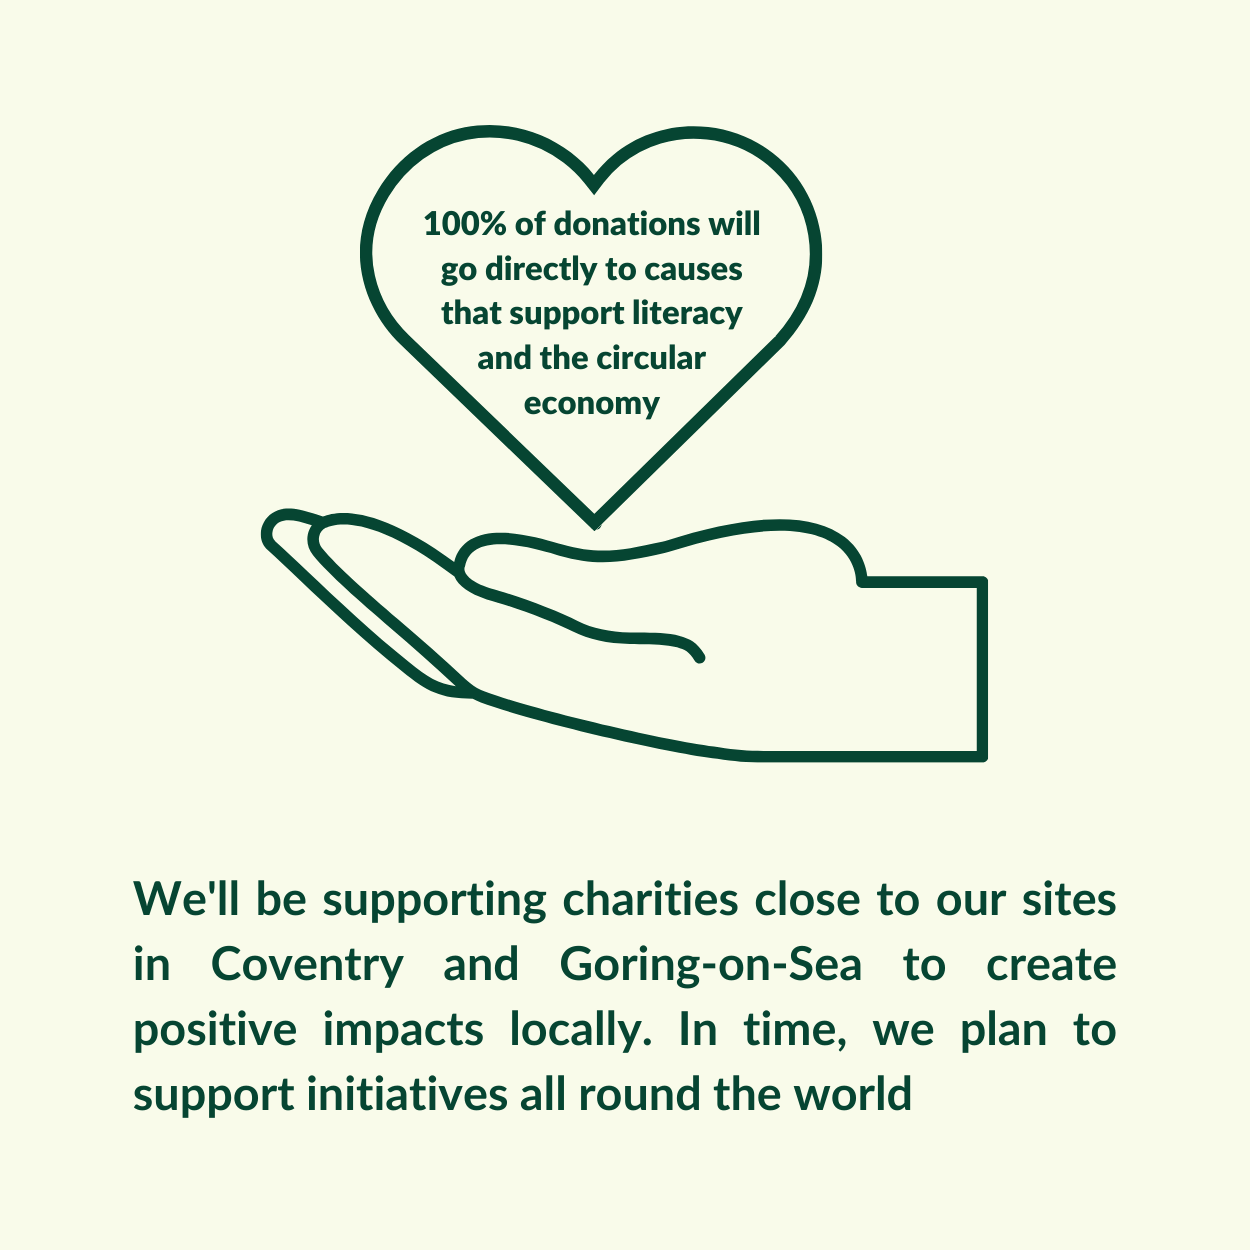 100% of donations raised by the charity will go directly to causes that support literacy and the circular economy.The Wob Foundation will support charities close to our sites in Coventry and Goring-on-Sea to create positive impacts locally. In time, we plan to support initiatives all around the world.